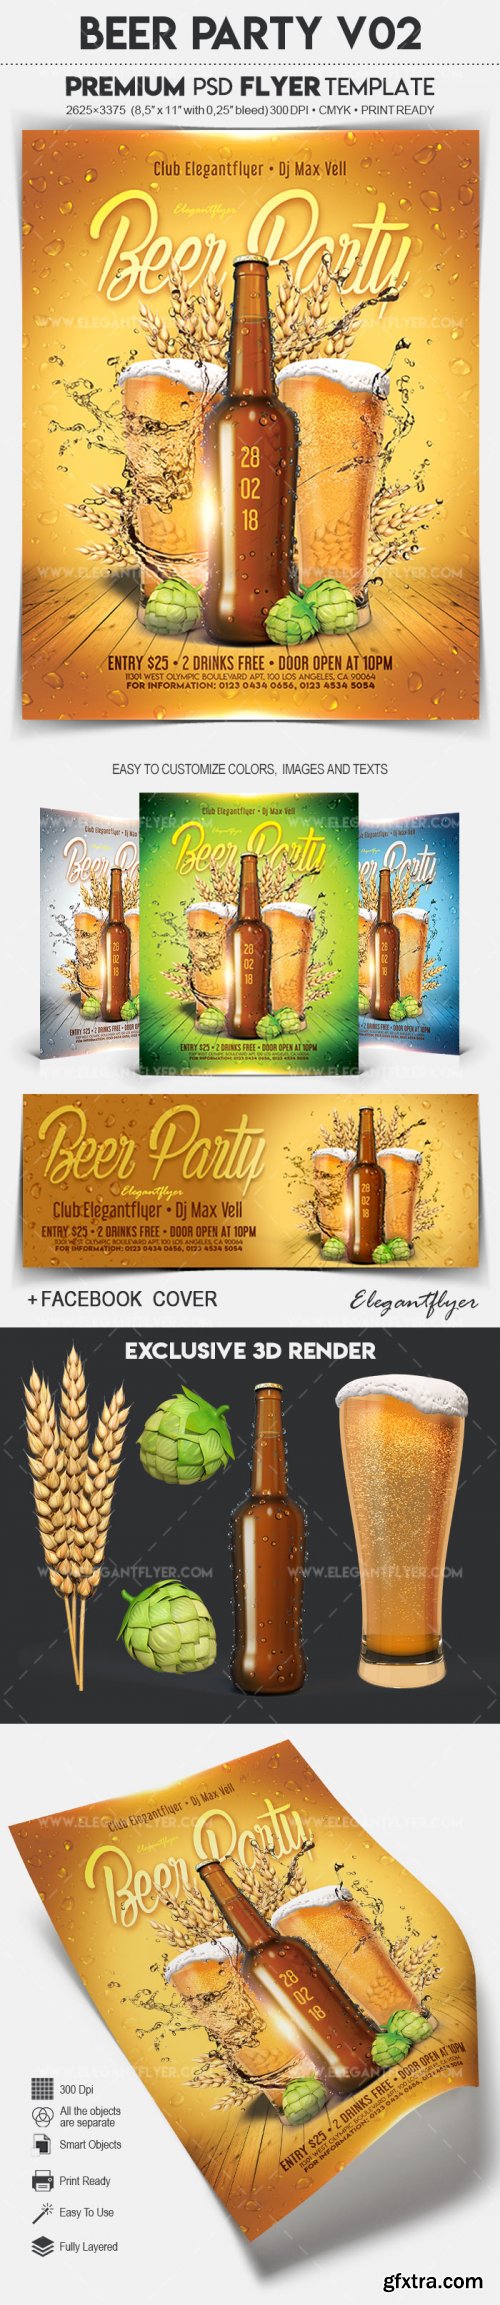 Beer Party V02 2018 Flyer PSD Template + Facebook Cover